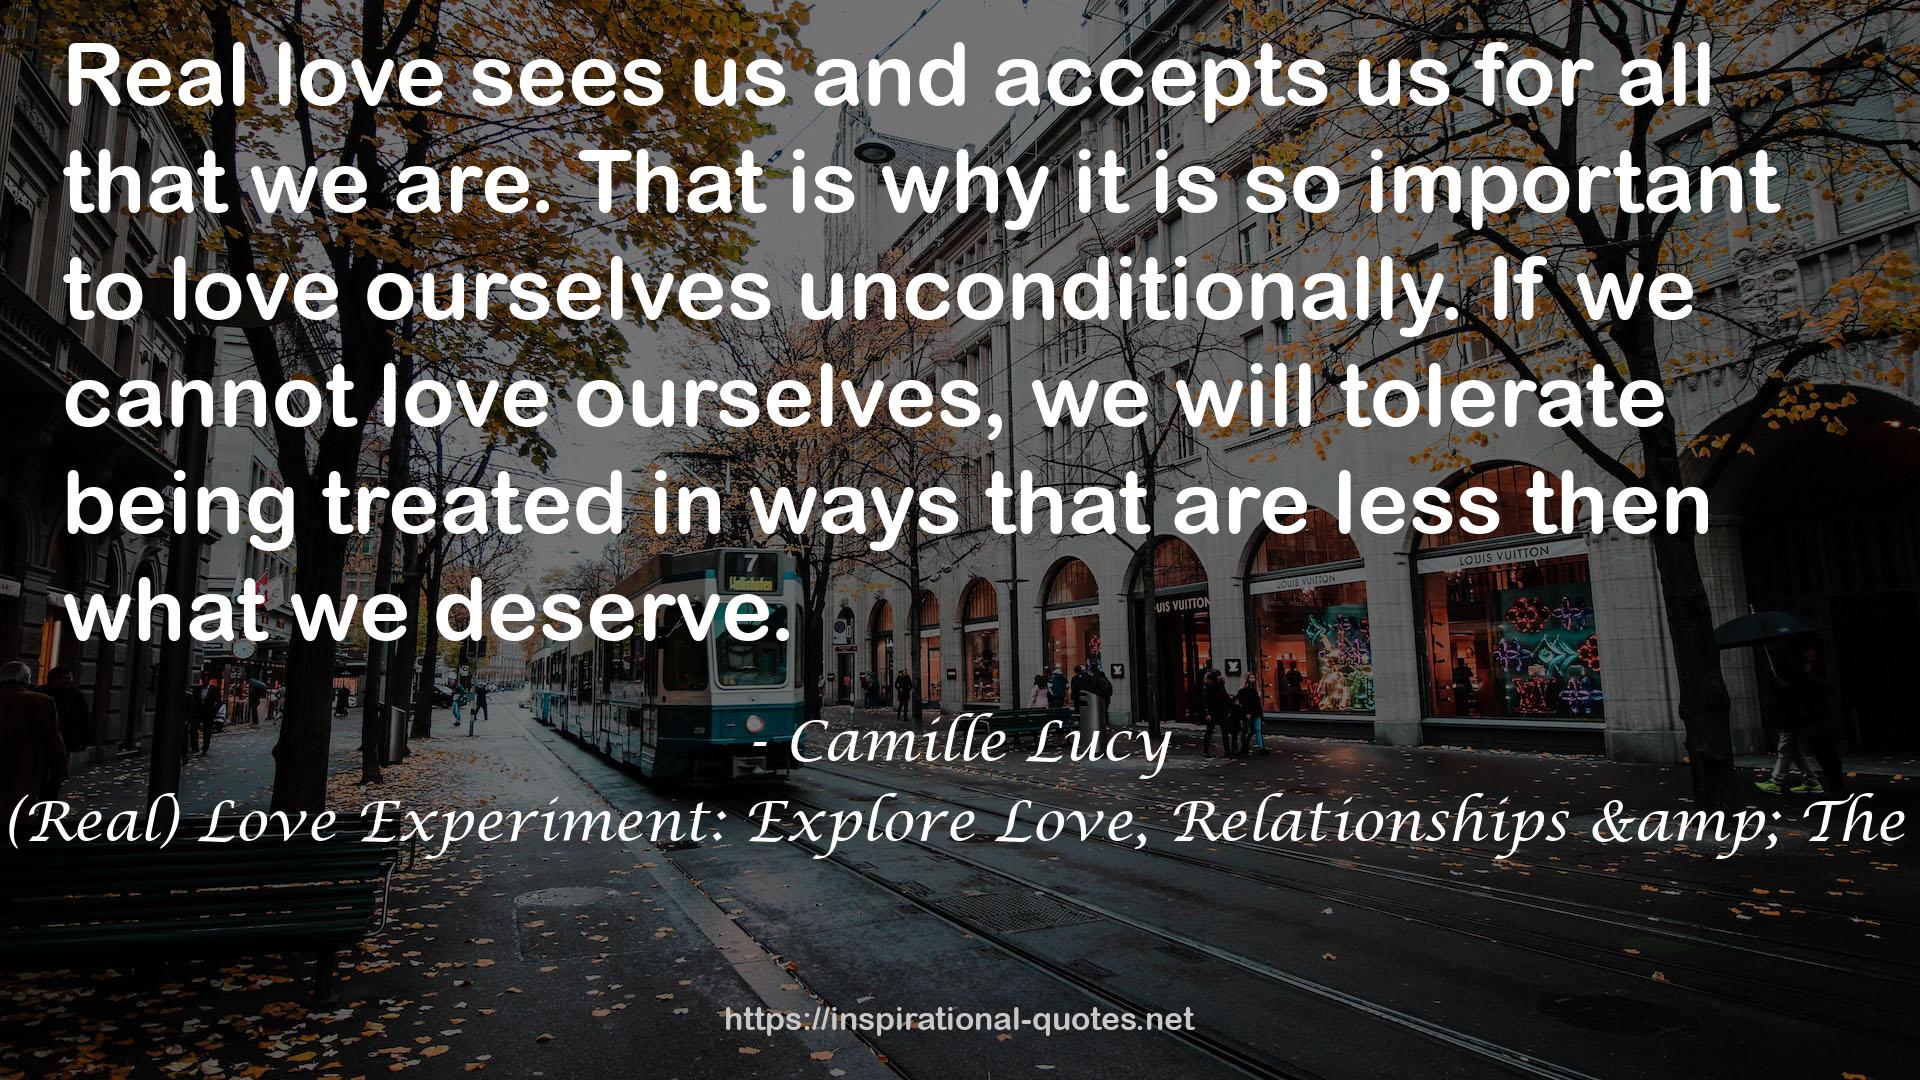 The (Real) Love Experiment: Explore Love, Relationships & The Self QUOTES